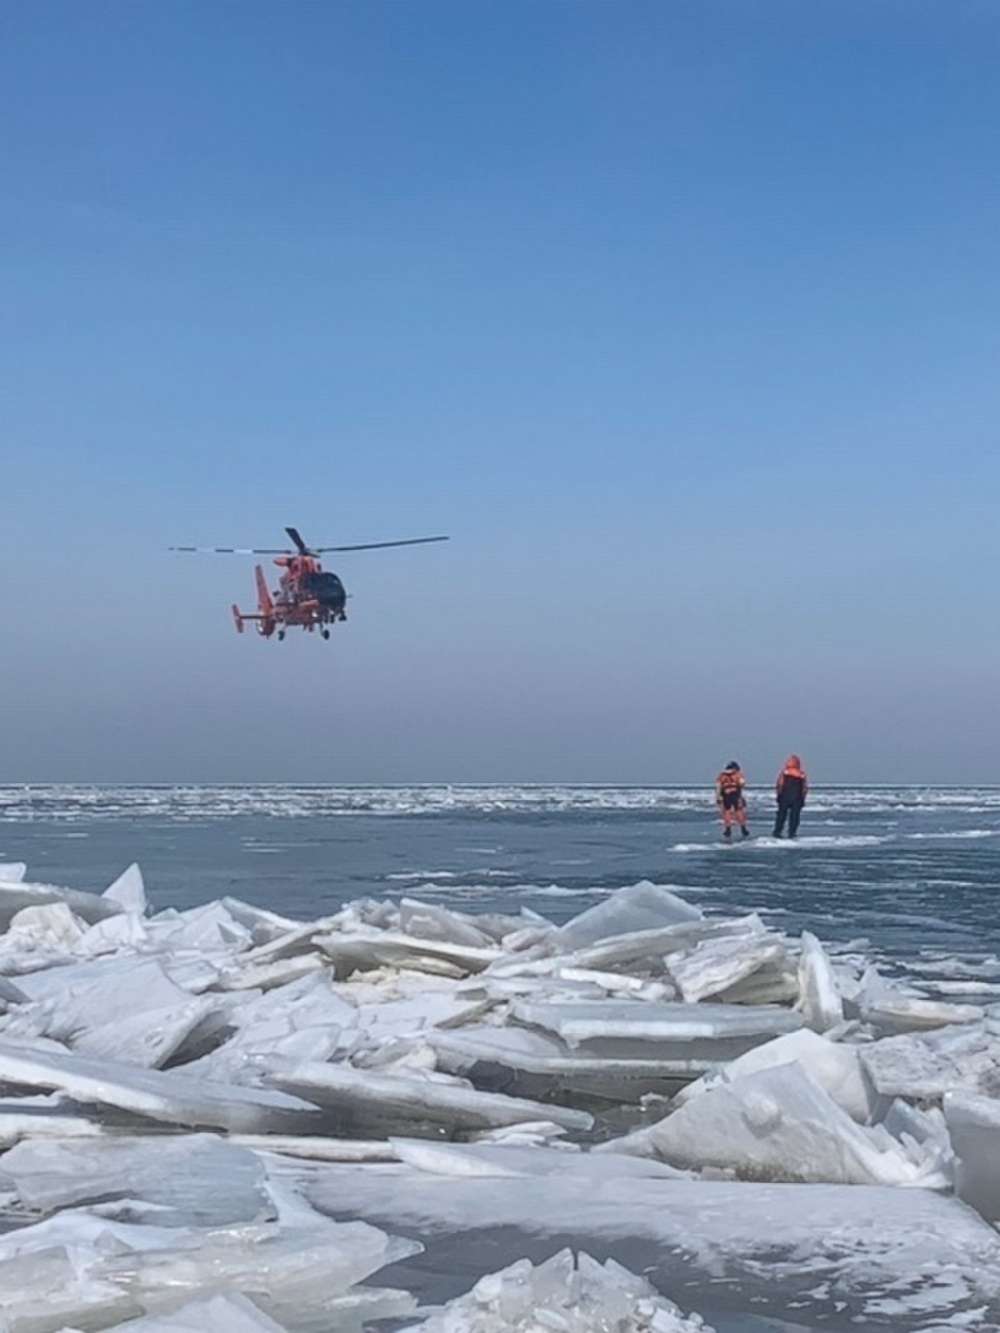 PHOTO: Forty-six ice fishermen were rescued by the U.S. Coast Guard near Catawba Island, Ohio, after becoming stranded on an ice floe on Saturday, March 9, 2019.